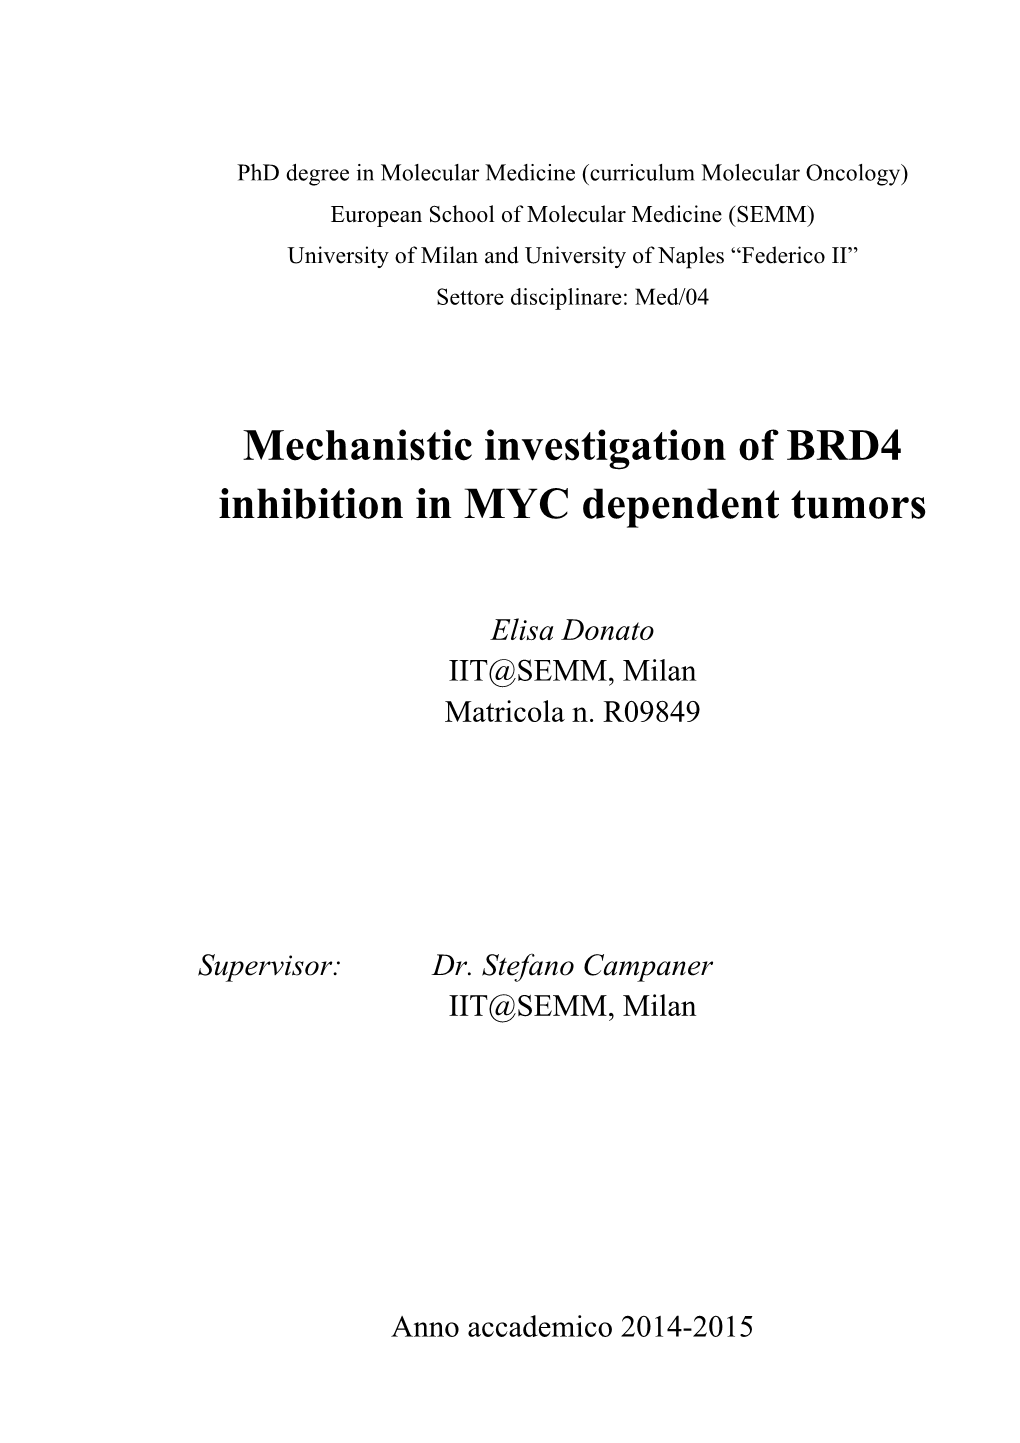 Mechanistic Investigation of BRD4 Inhibition in MYC Dependent Tumors